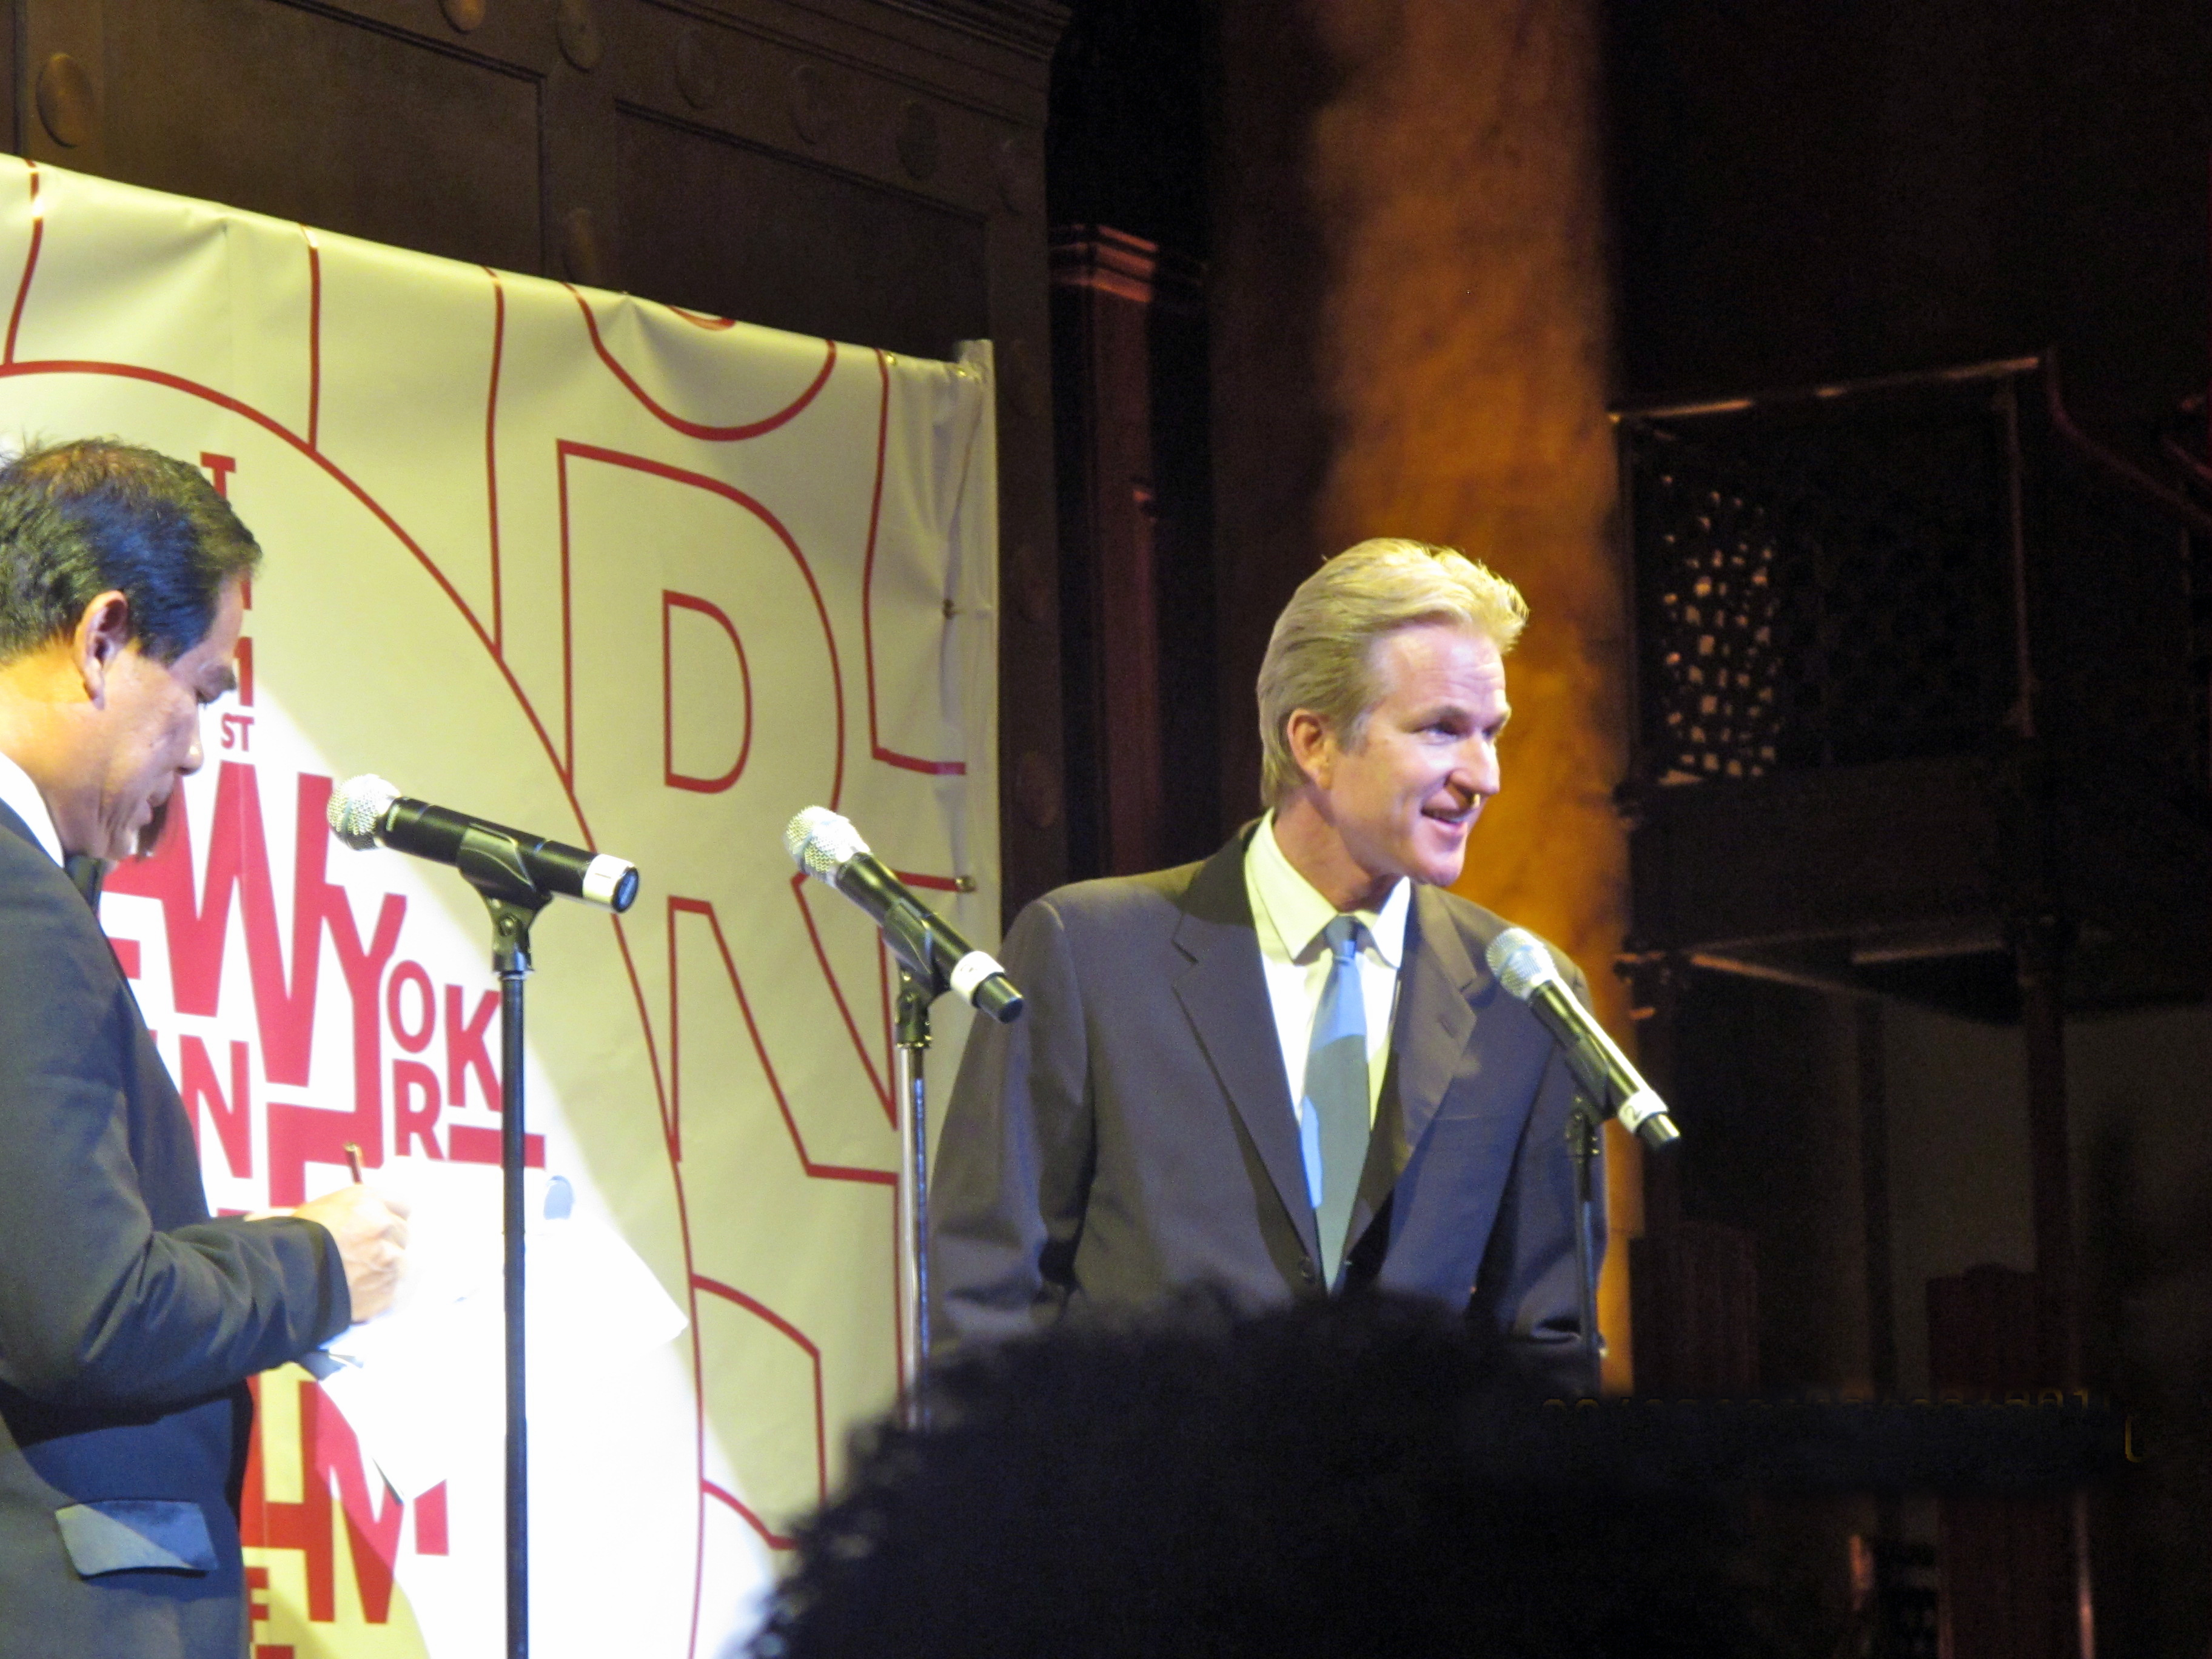 Here is a photo of Mathew Modine whom I met at the First Annual Chinese Film Festival.